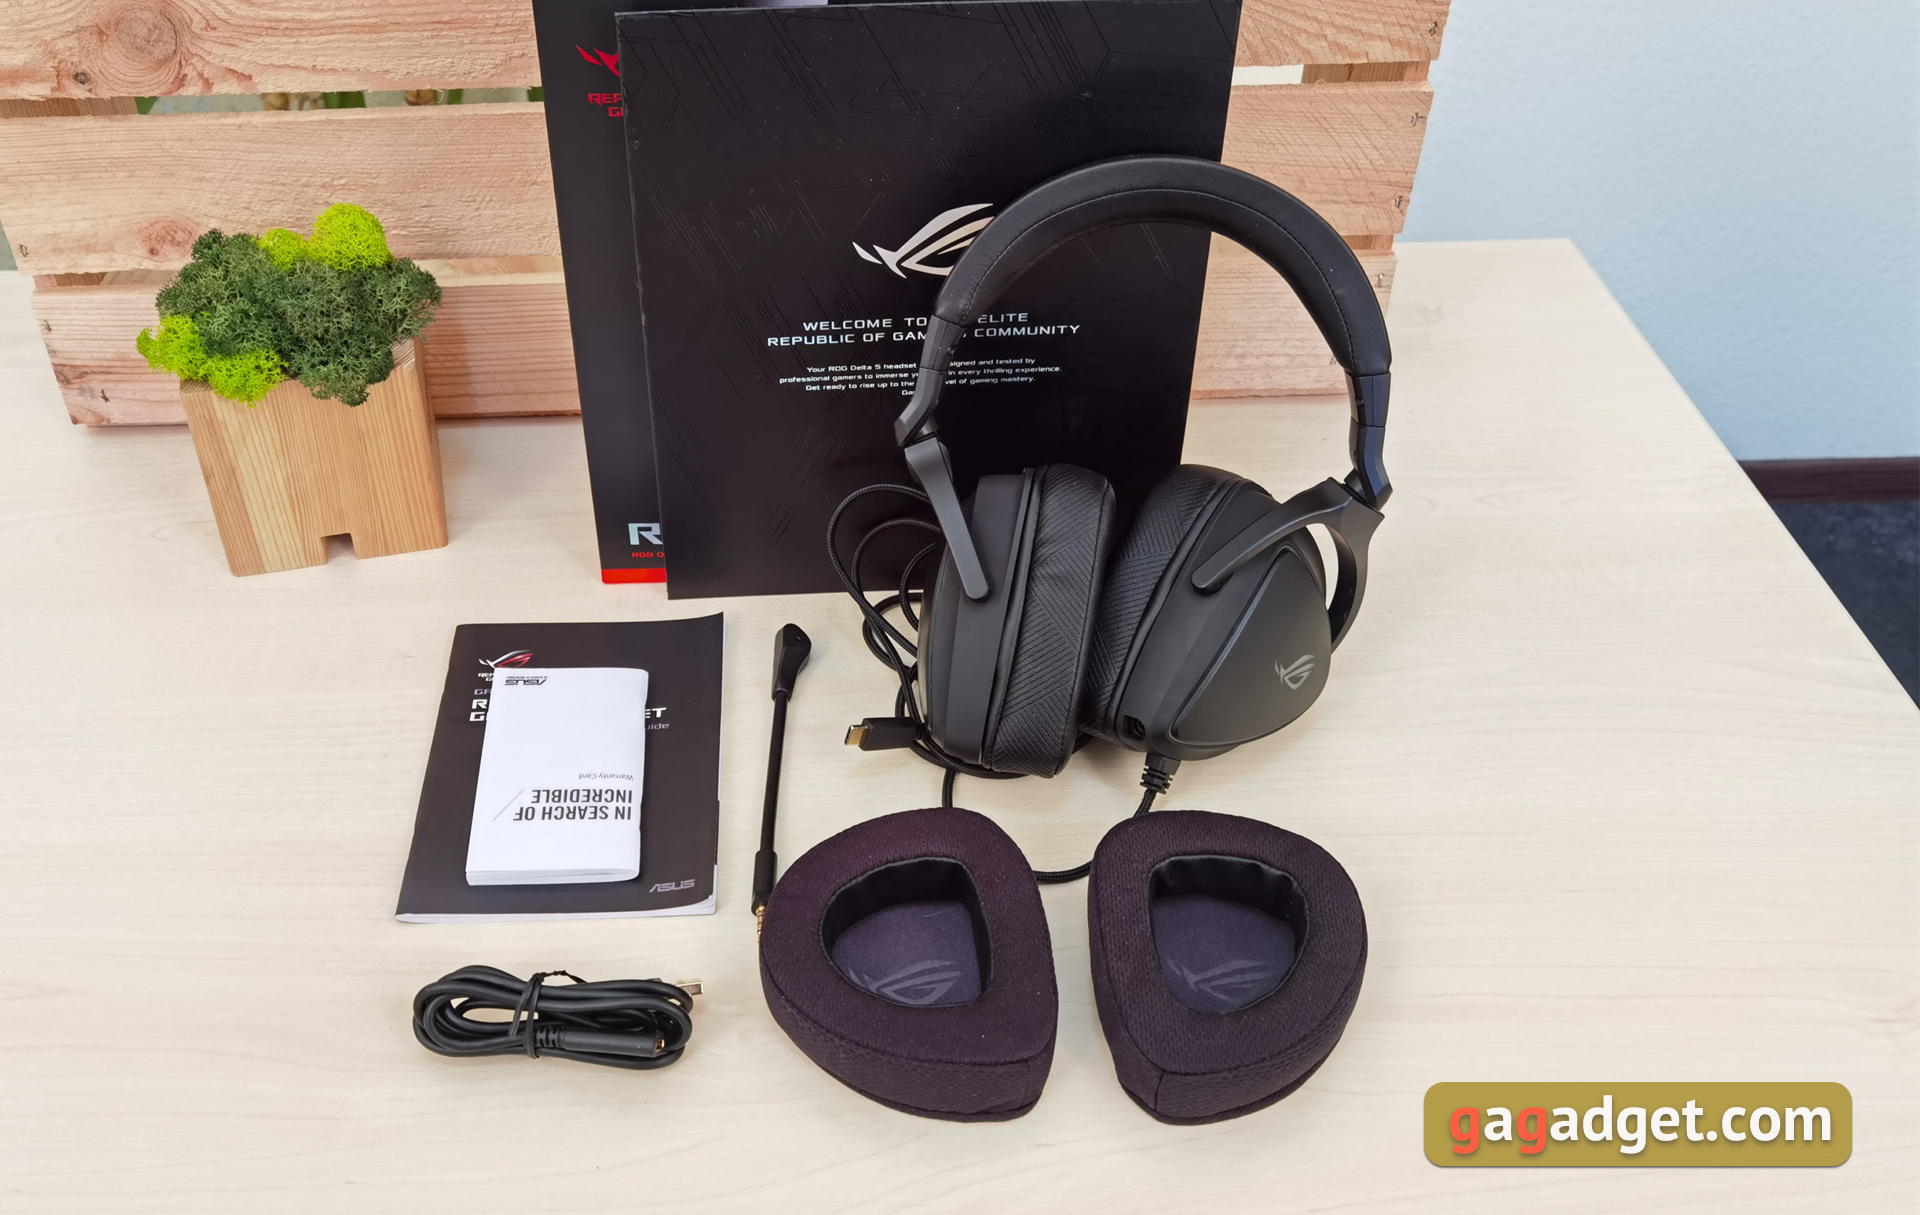 Asus ROG Delta S review: Hi-res audio that's awesome for Tidal 